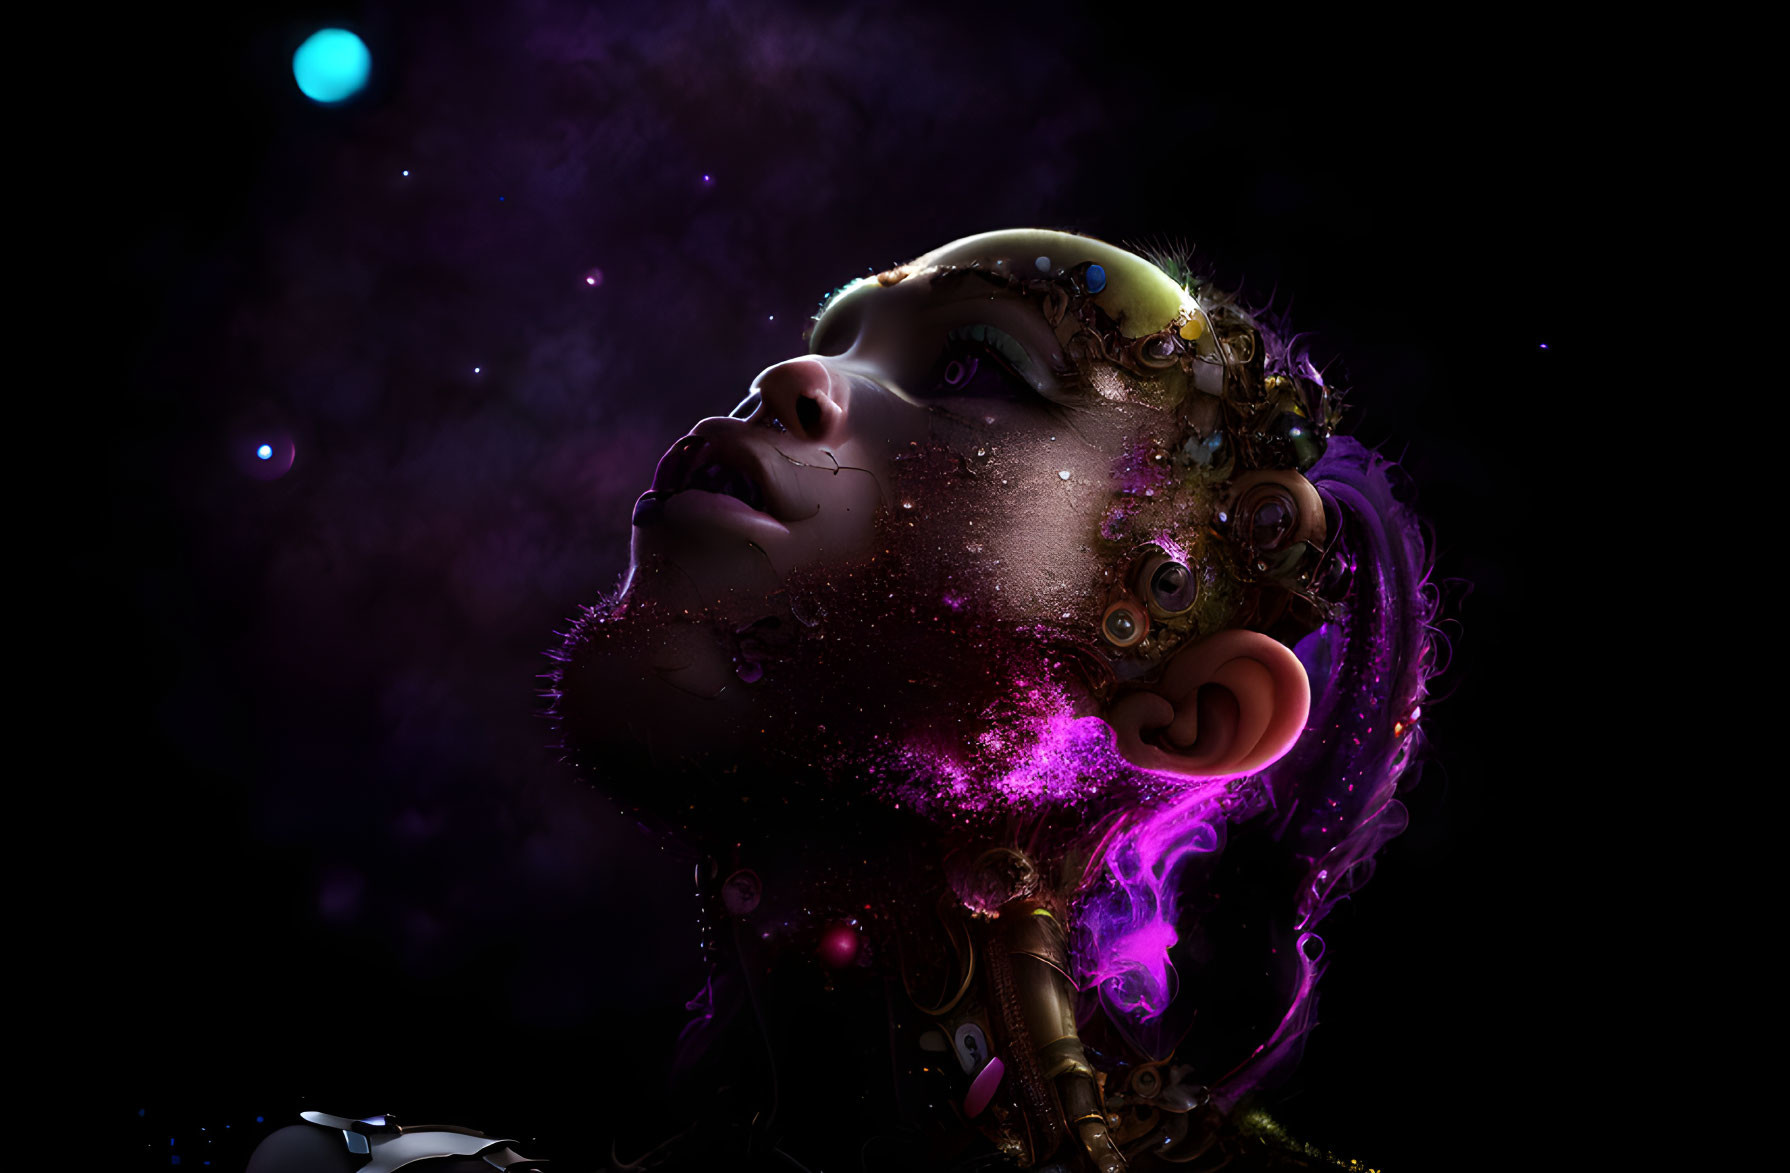 Intricate headgear and glowing purple accents on surreal portrait